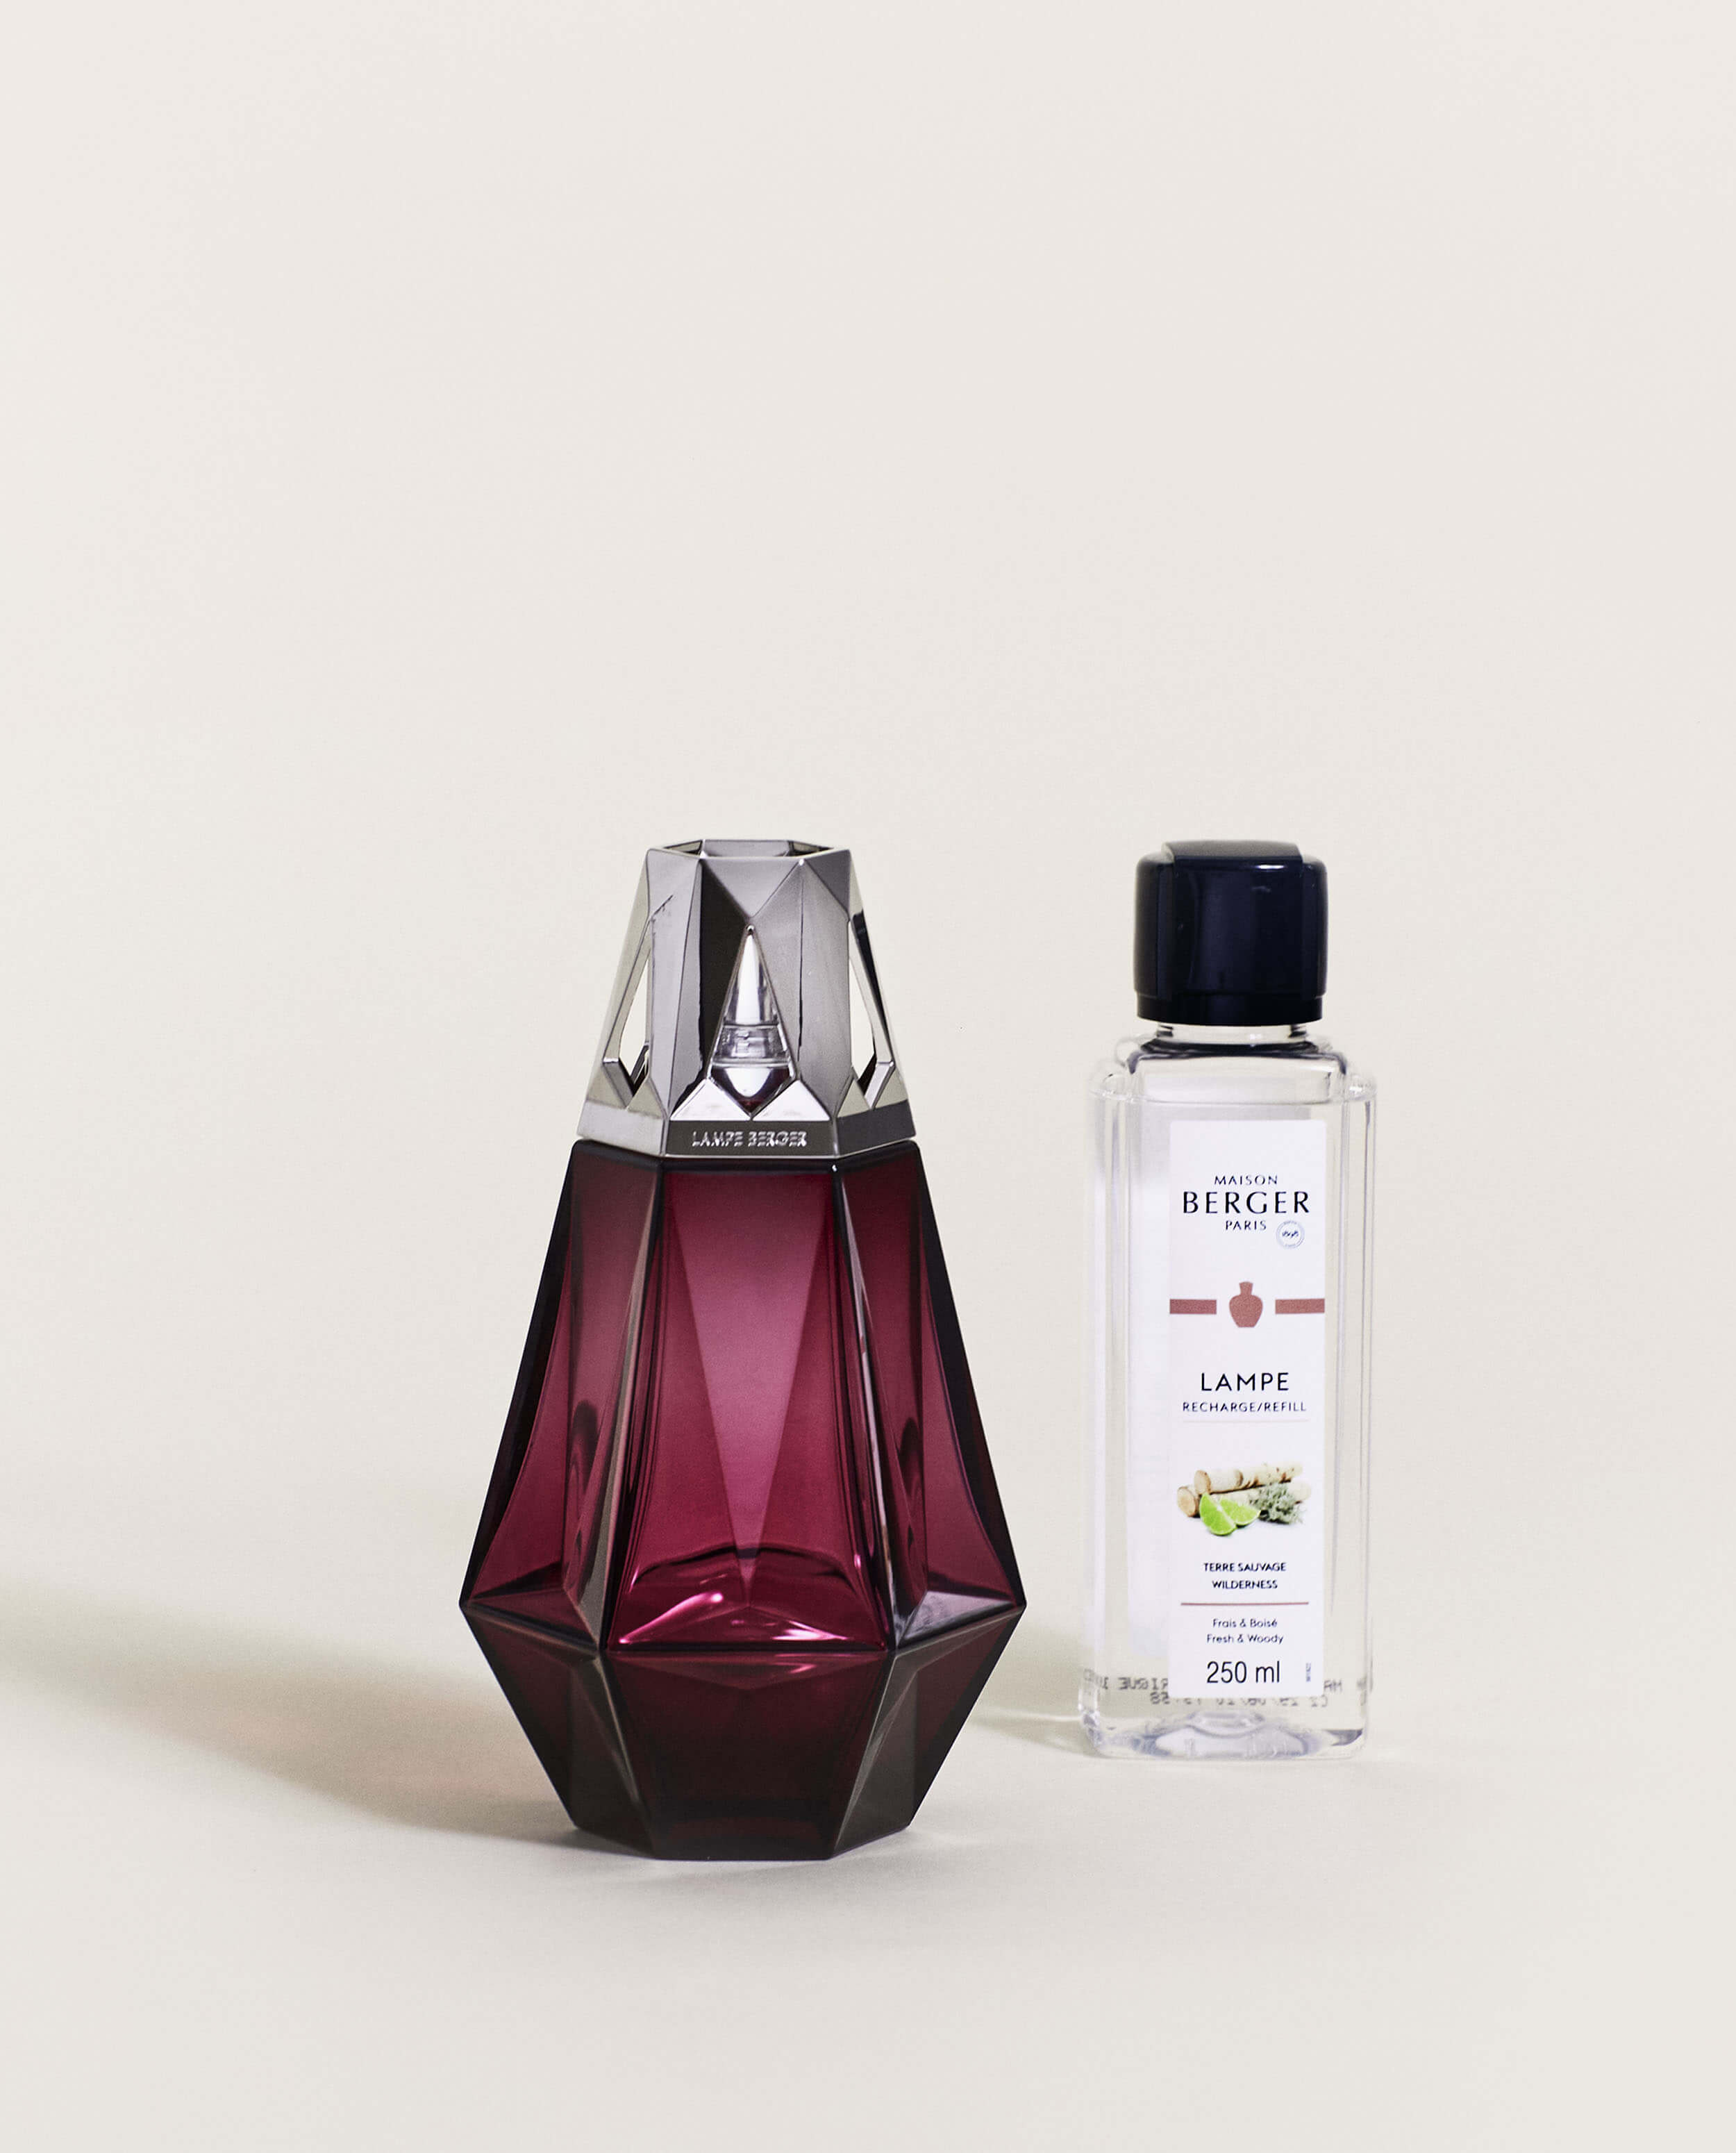 Shop by Category - Gifts - Women's Gifts & Accessories - Home Fragrance &  Bath & Body - Maison Berger (Lampe Berger) Fragrances & Lamps - Distinctive  Decor